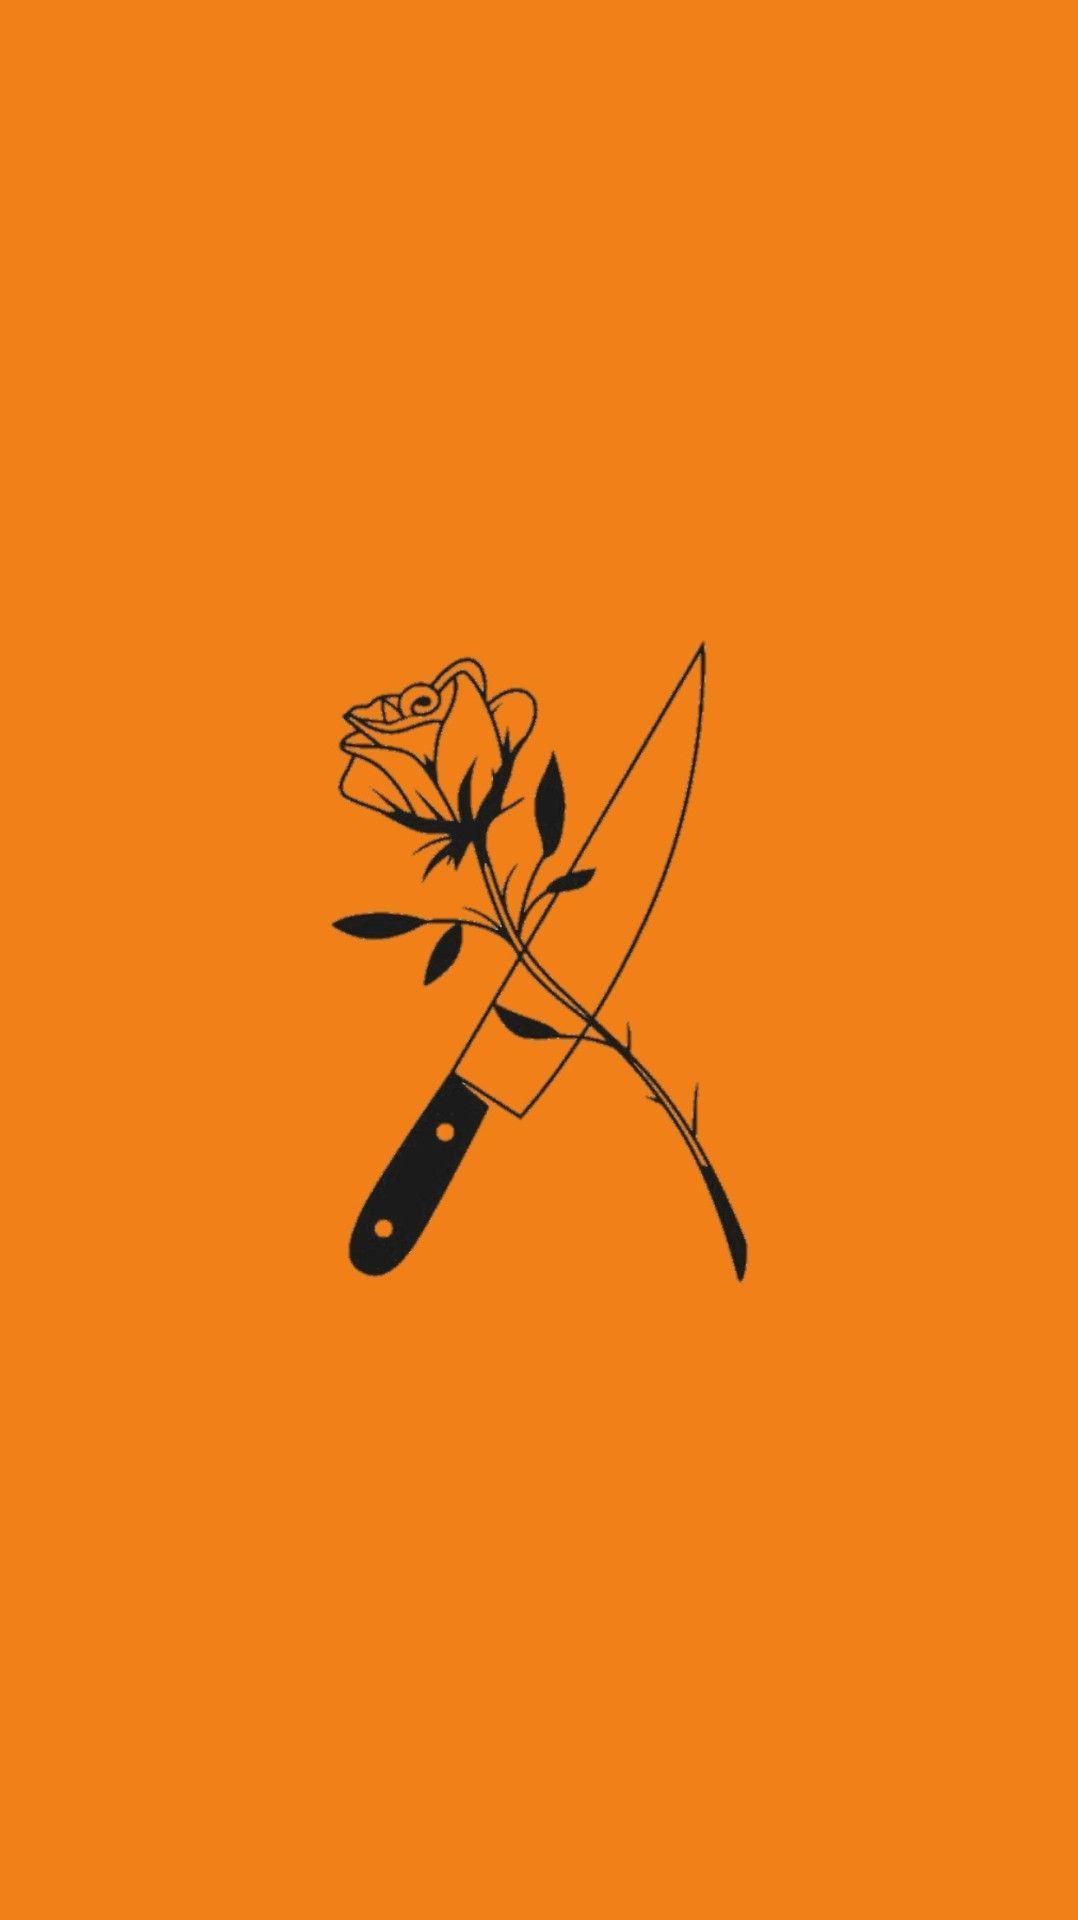 A knife and rose on an orange background - Neon orange